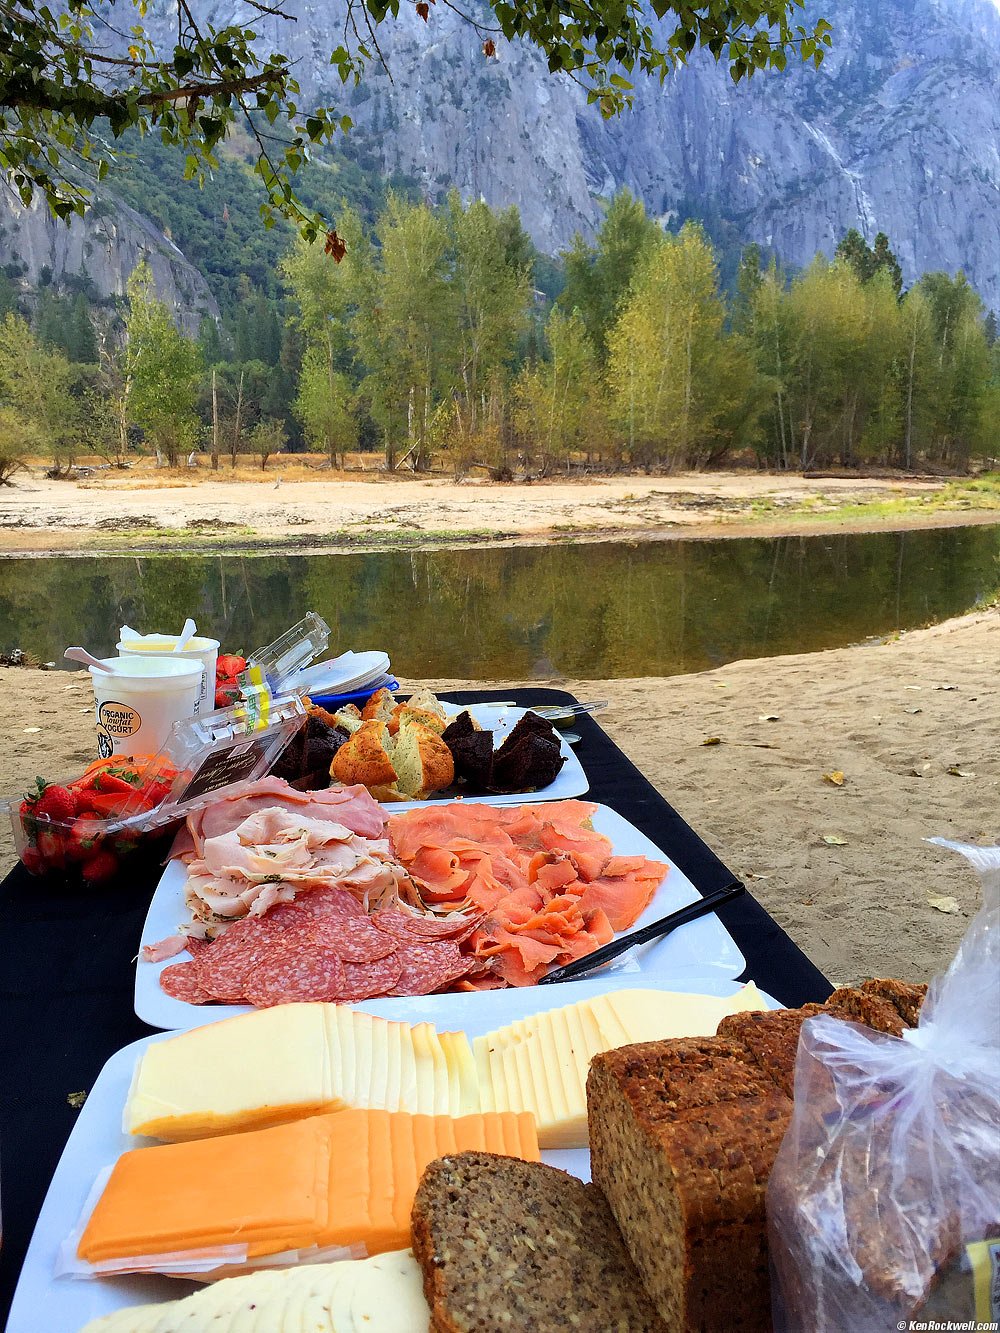 Breakfast along the Banks of the Merced River, Yosemite Valley